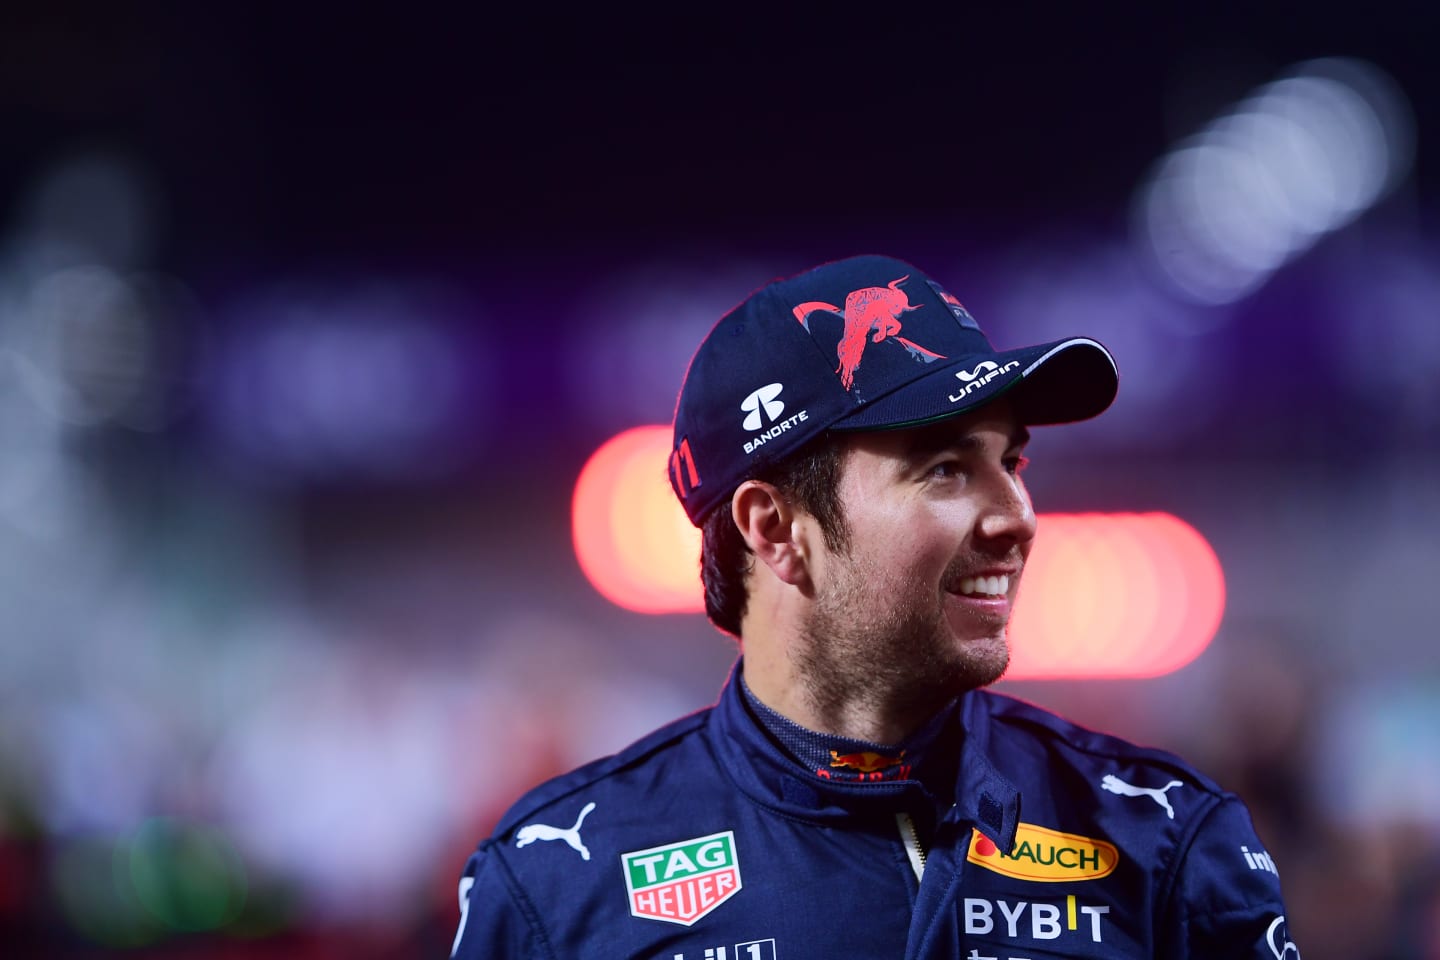 JEDDAH, SAUDI ARABIA - MARCH 26: Pole position qualifier Sergio Perez of Mexico and Oracle Red Bull Racing looks on  in parc ferme during qualifying ahead of the F1 Grand Prix of Saudi Arabia at the Jeddah Corniche Circuit on March 26, 2022 in Jeddah, Saudi Arabia. (Photo by Mario Renzi - Formula 1/Formula 1 via Getty Images)